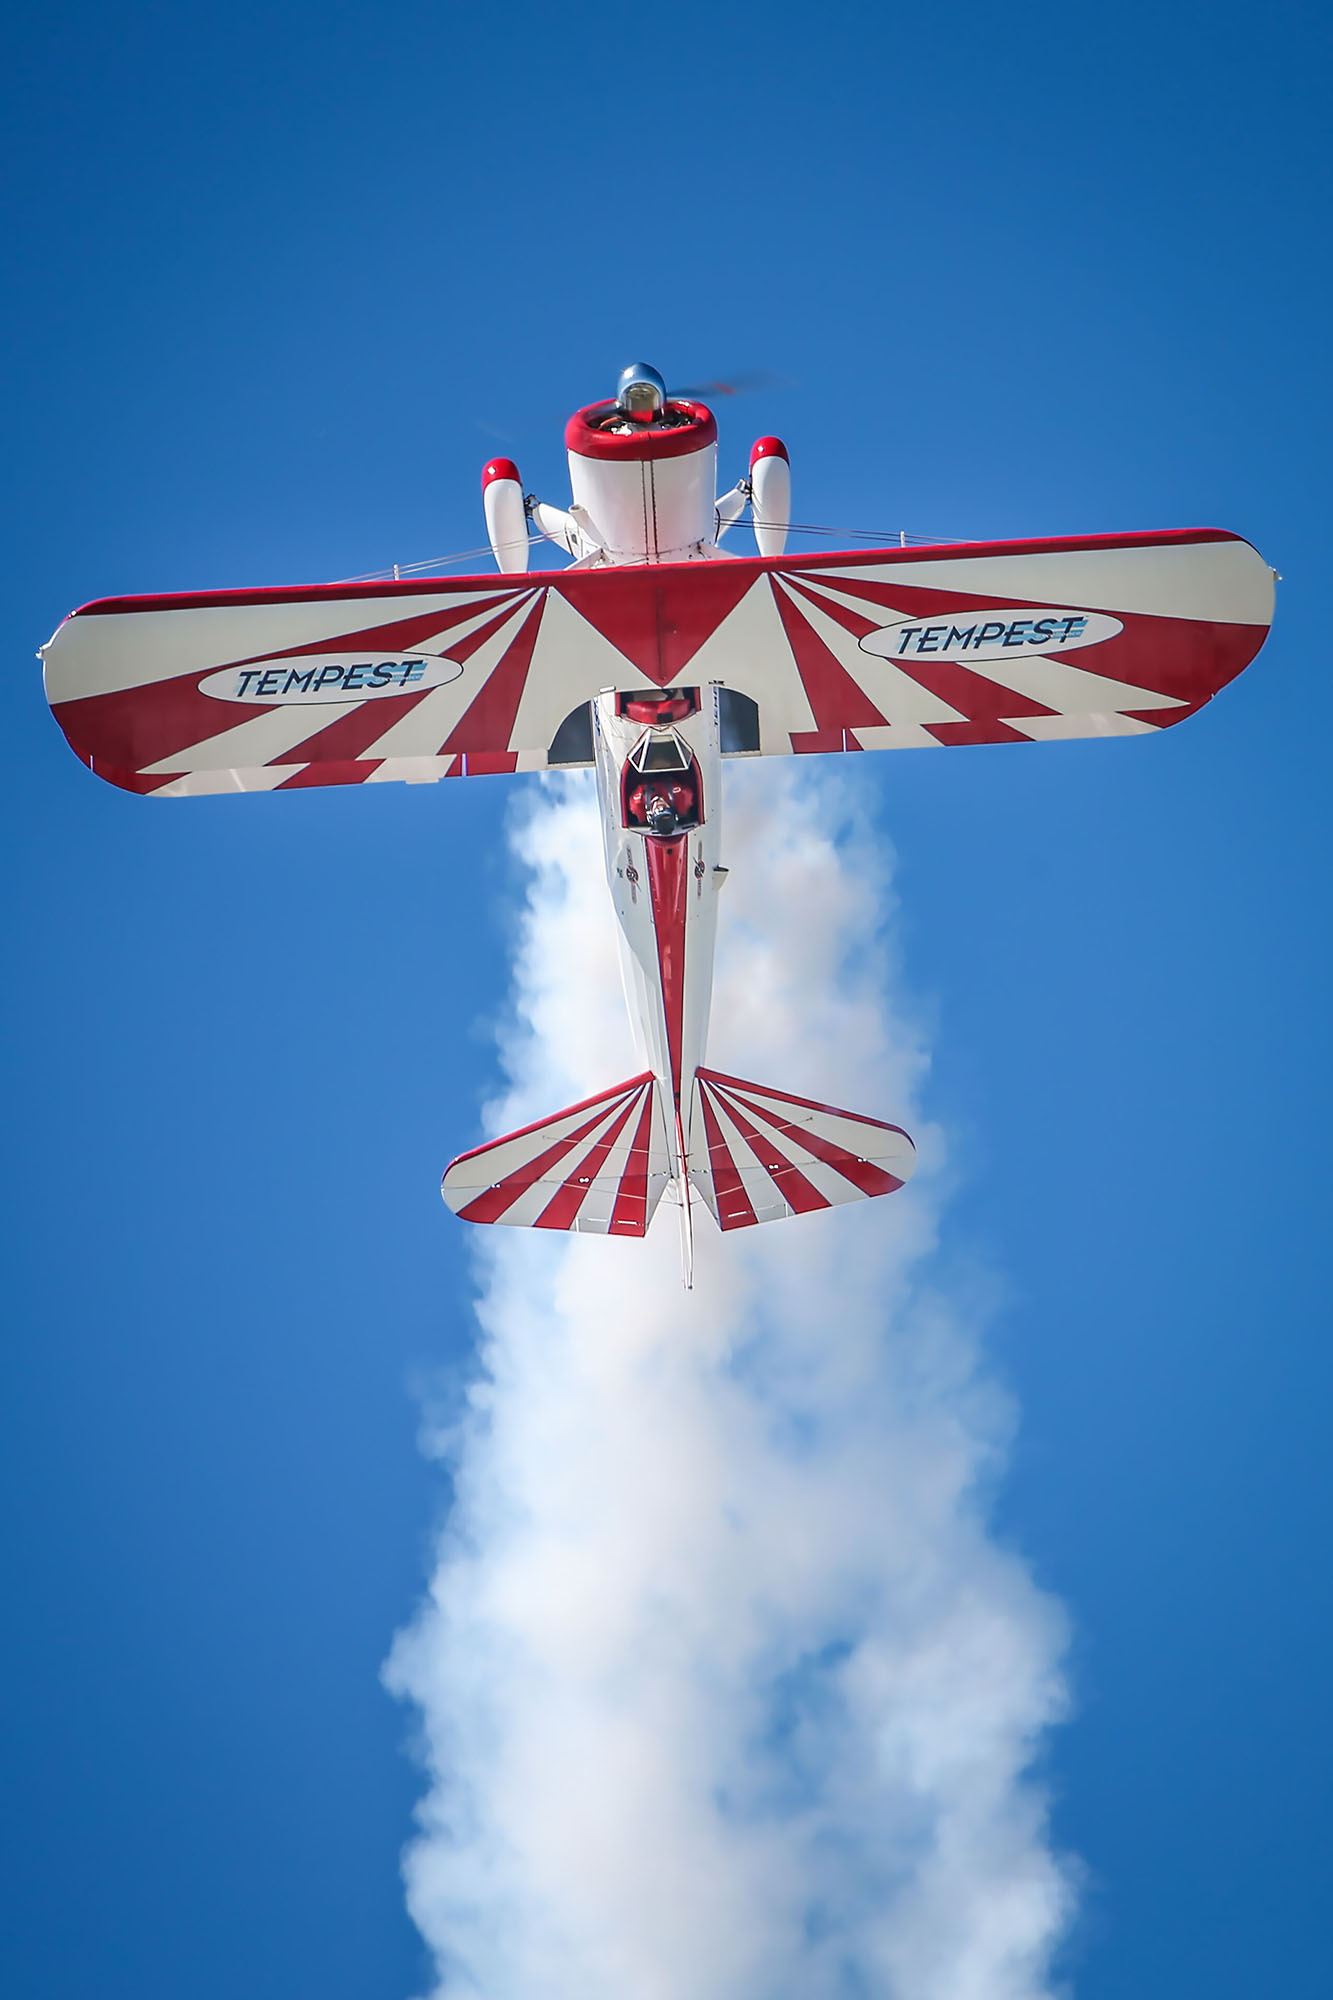 Aerobatics: The Pitts Special S-2 biplane, Inside loop maneuver, Performance in the air. 1340x2000 HD Background.